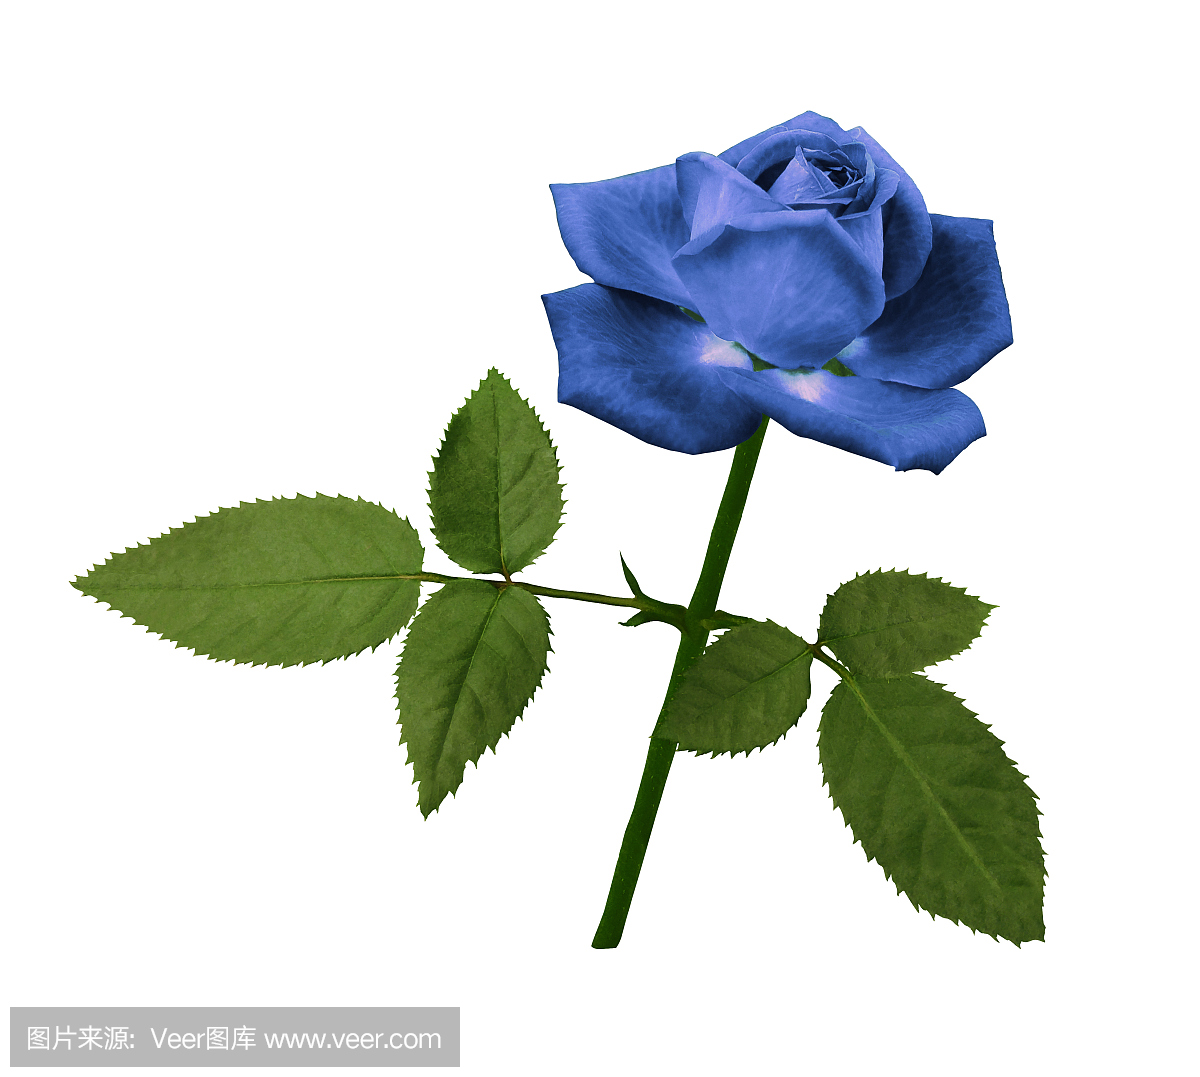 A flower of a blue rose on a green stem with lea